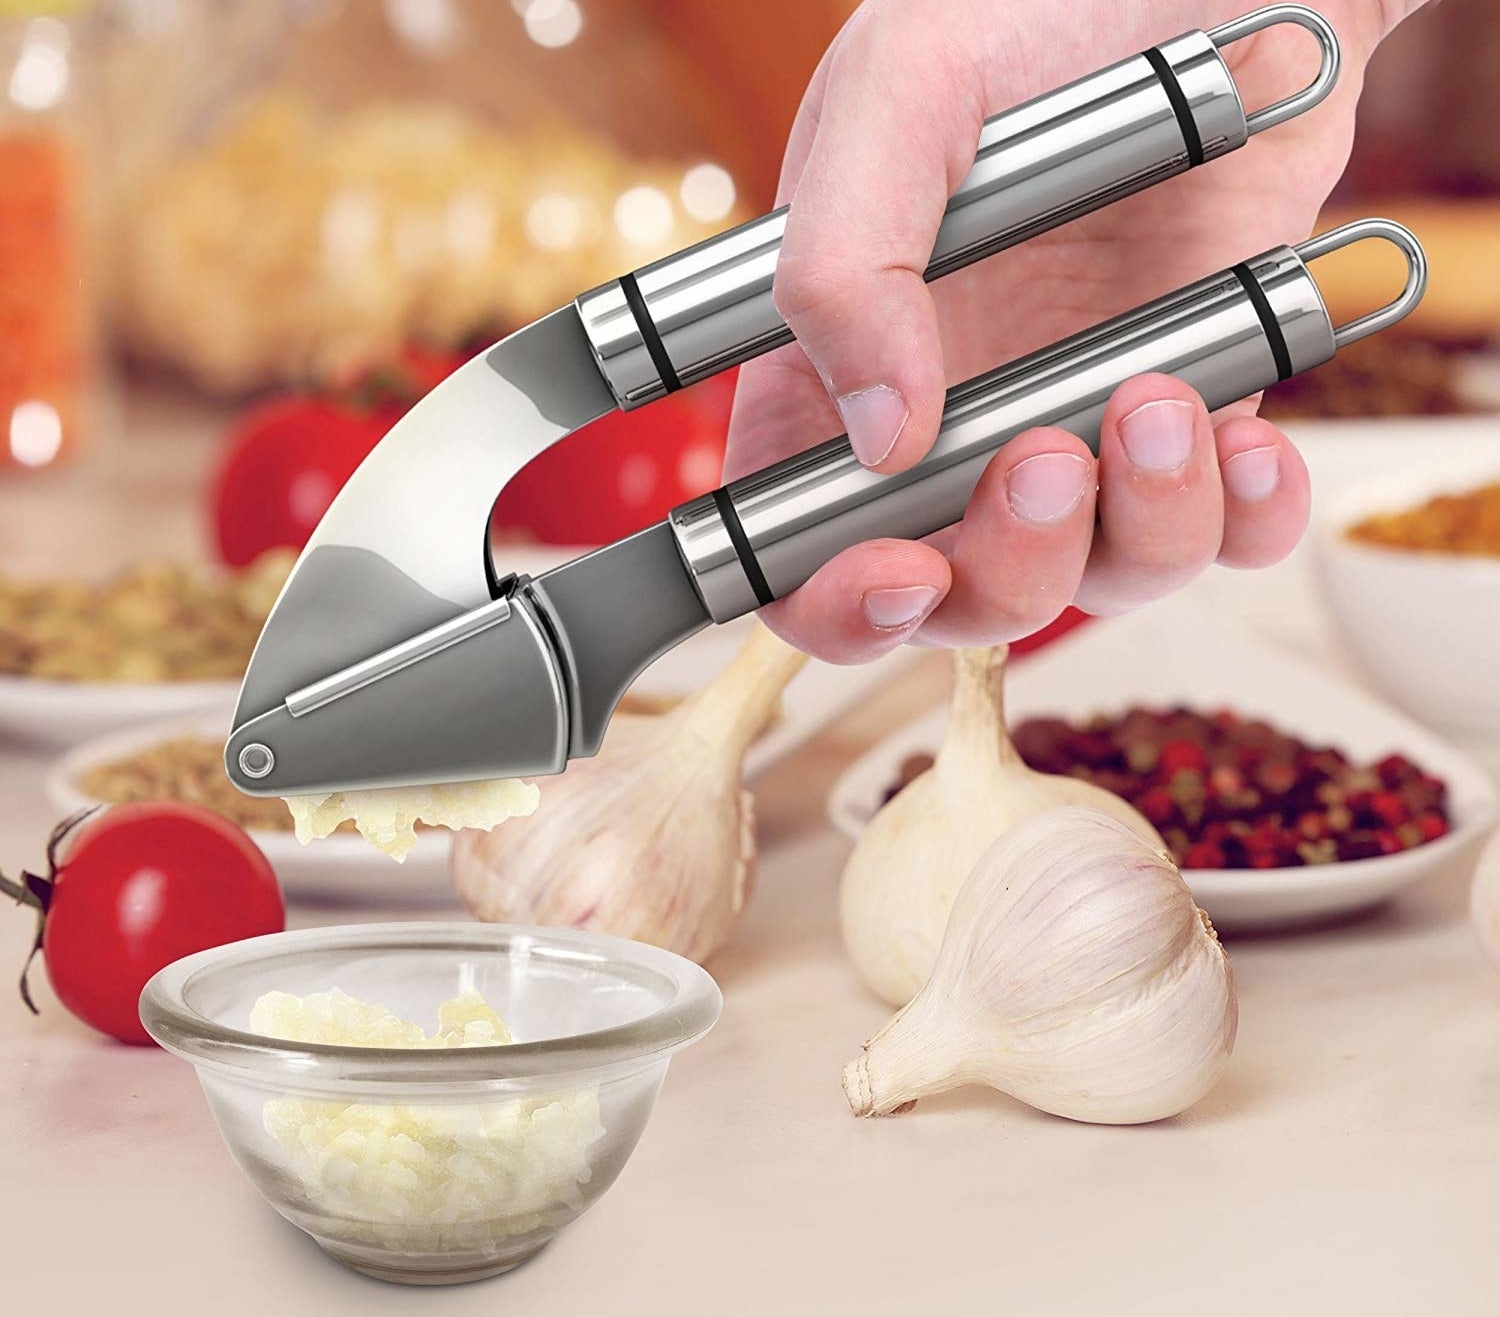 25 Of The Best Kitchen Tools, Accessories, And Gadgets You Can Get ...